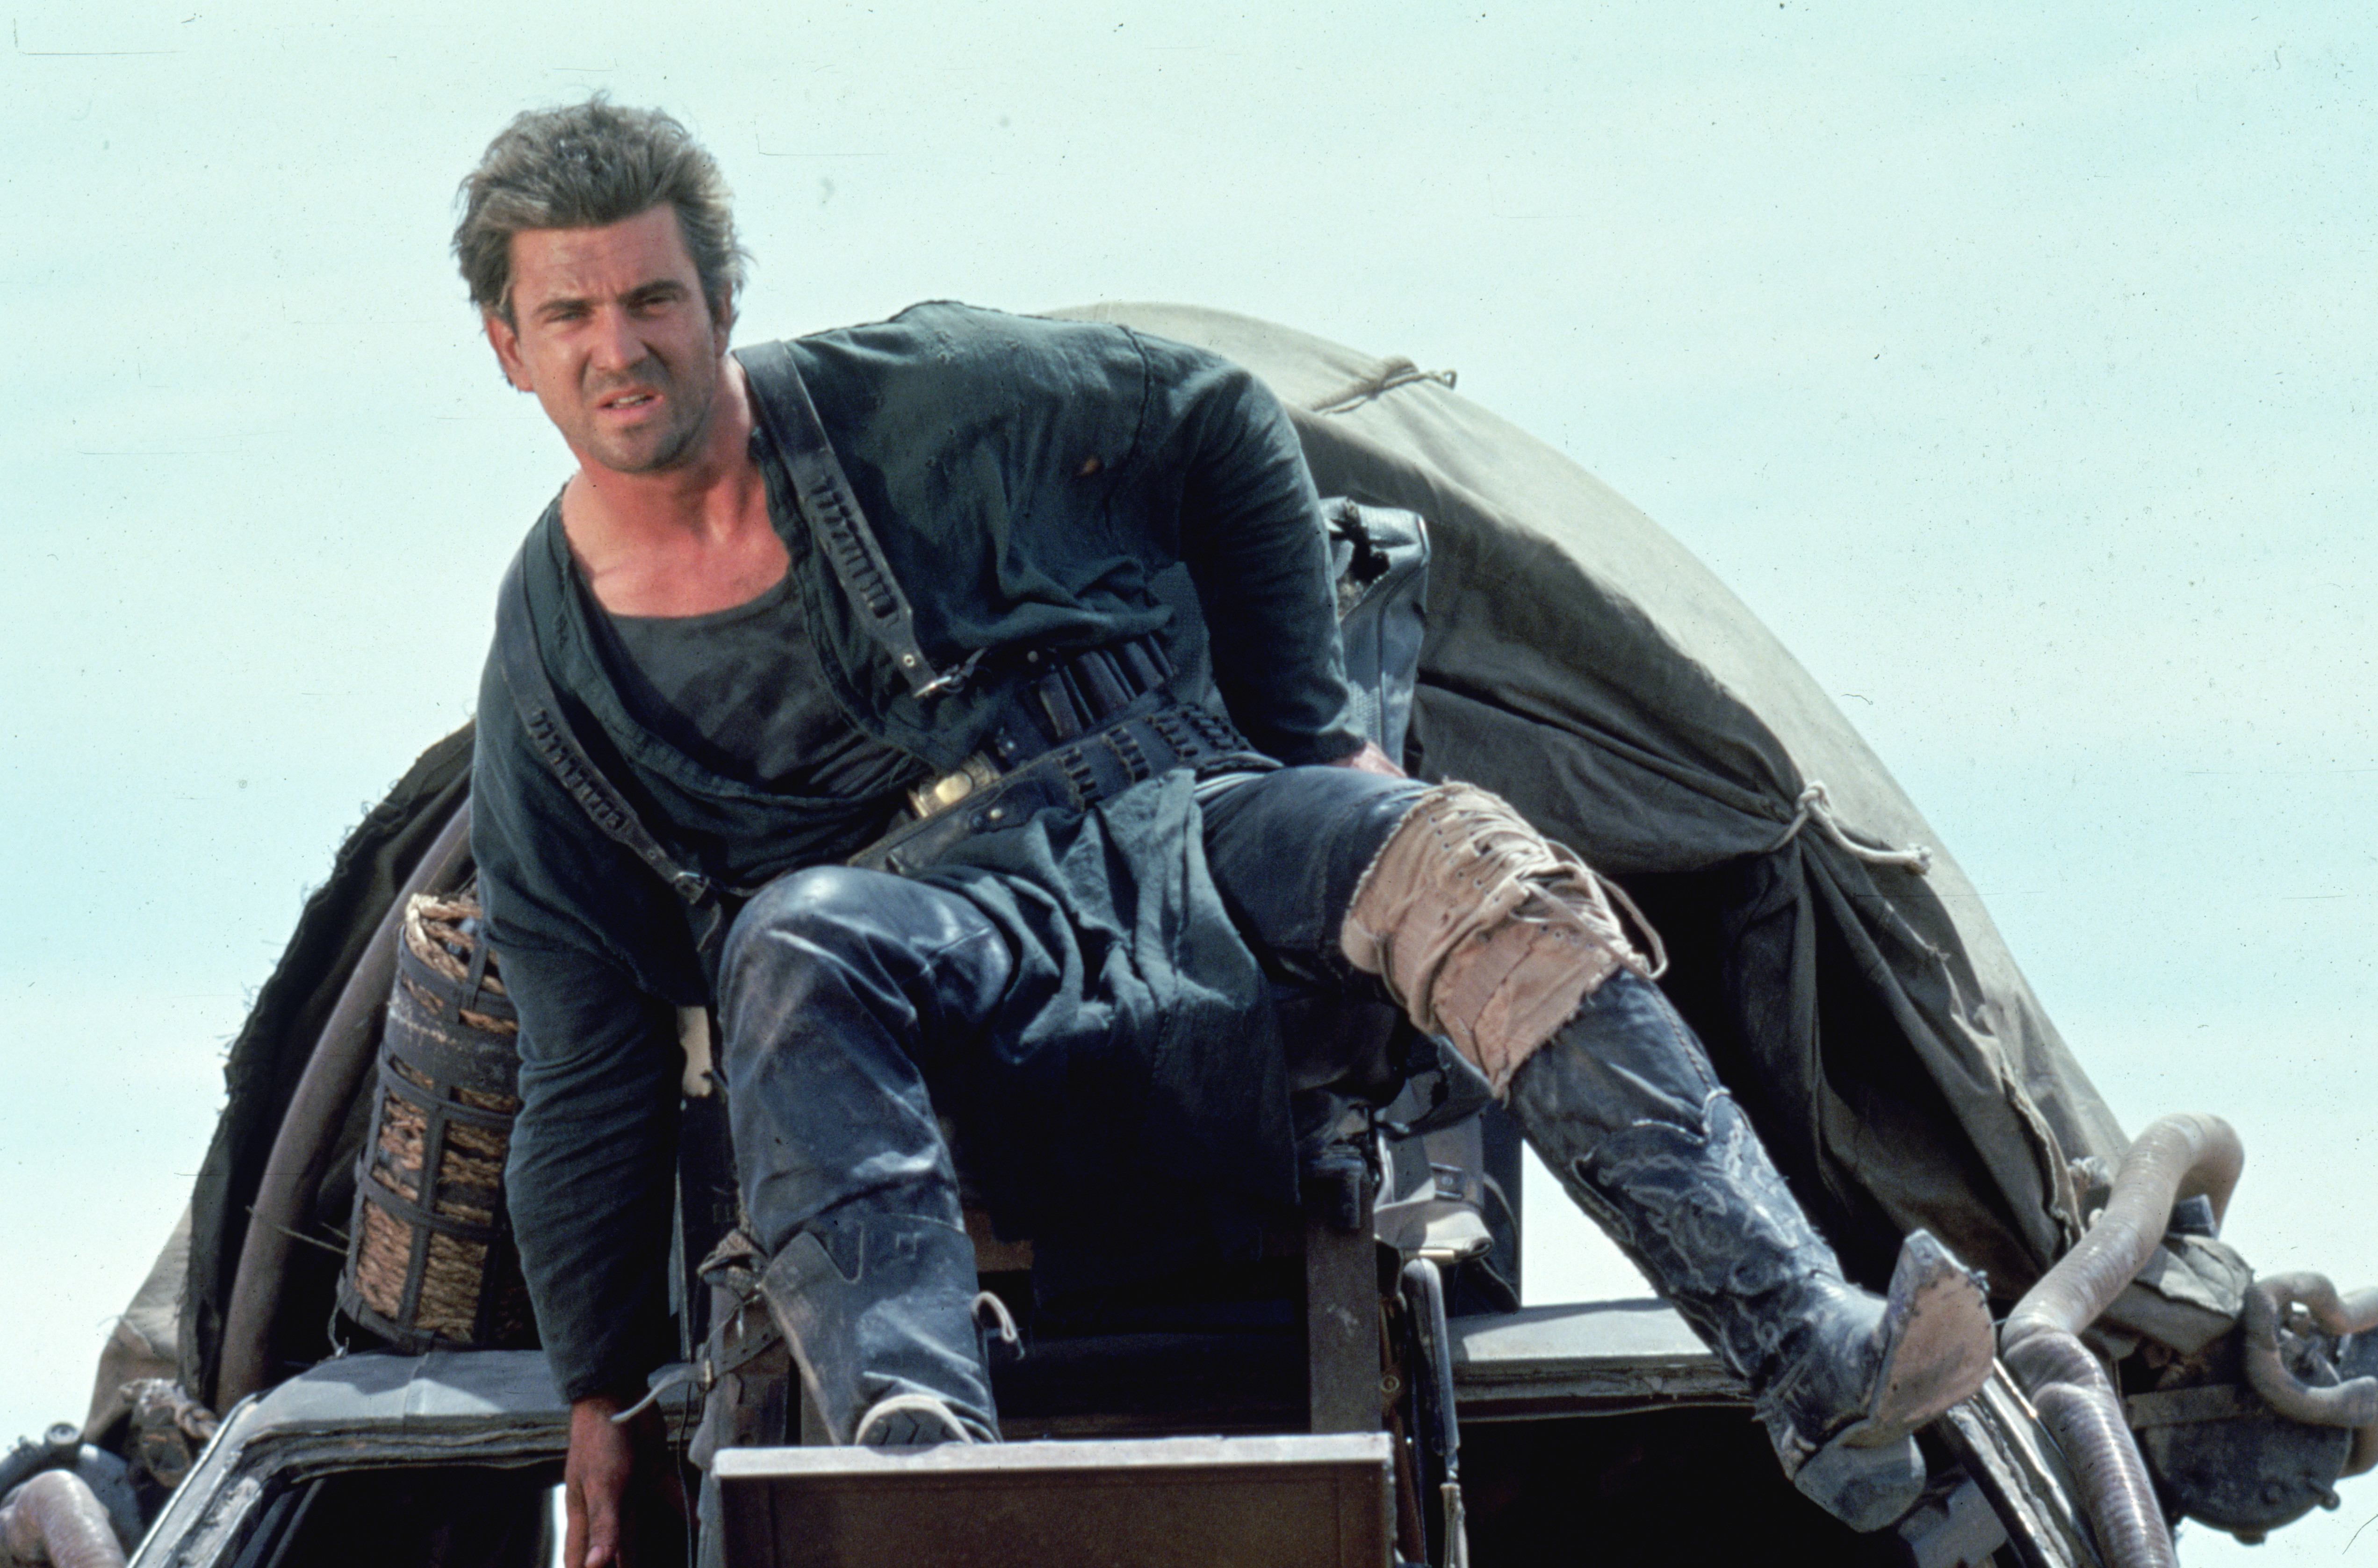 mad max beyond thunderdome characters